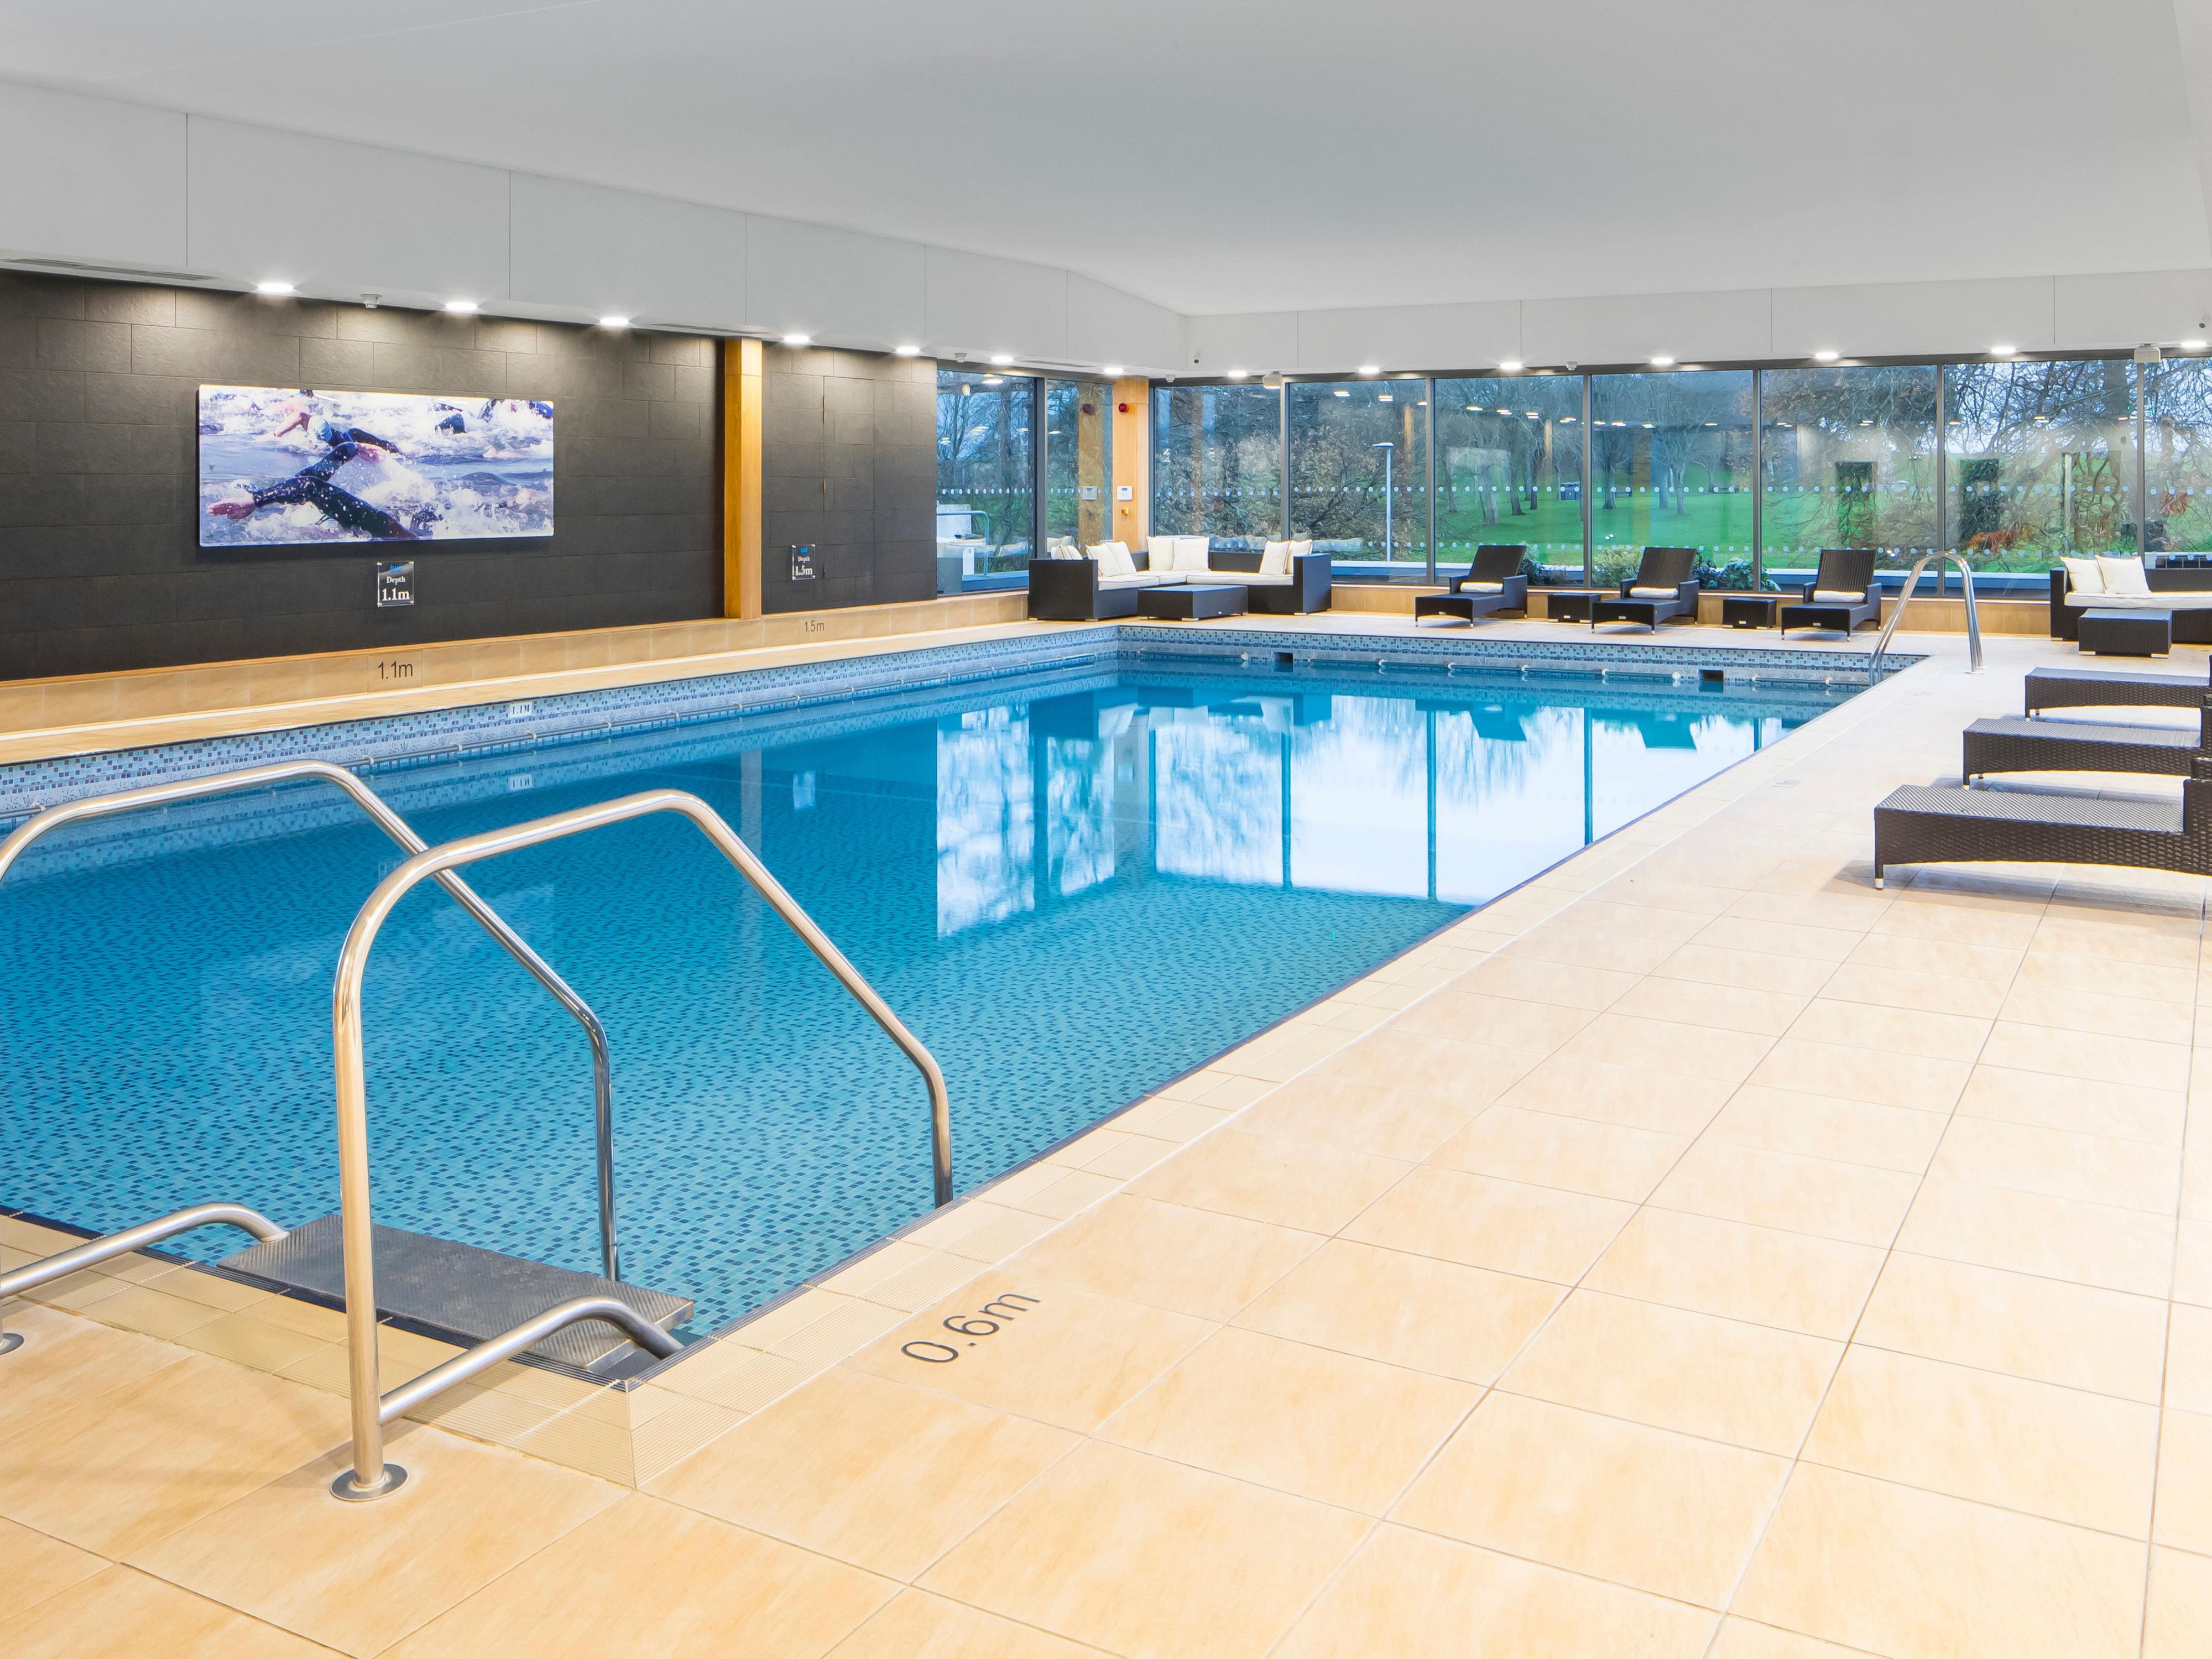 Maintaining a health and wellness routine while travelling is important, so whether you’re looking to stay on top of your fitness, or relax and unwind after a long day, Club Moativation has all that you need. Our fully equipped gym, heated indoor pool, sauna and steam room is open to hotel guests and members.